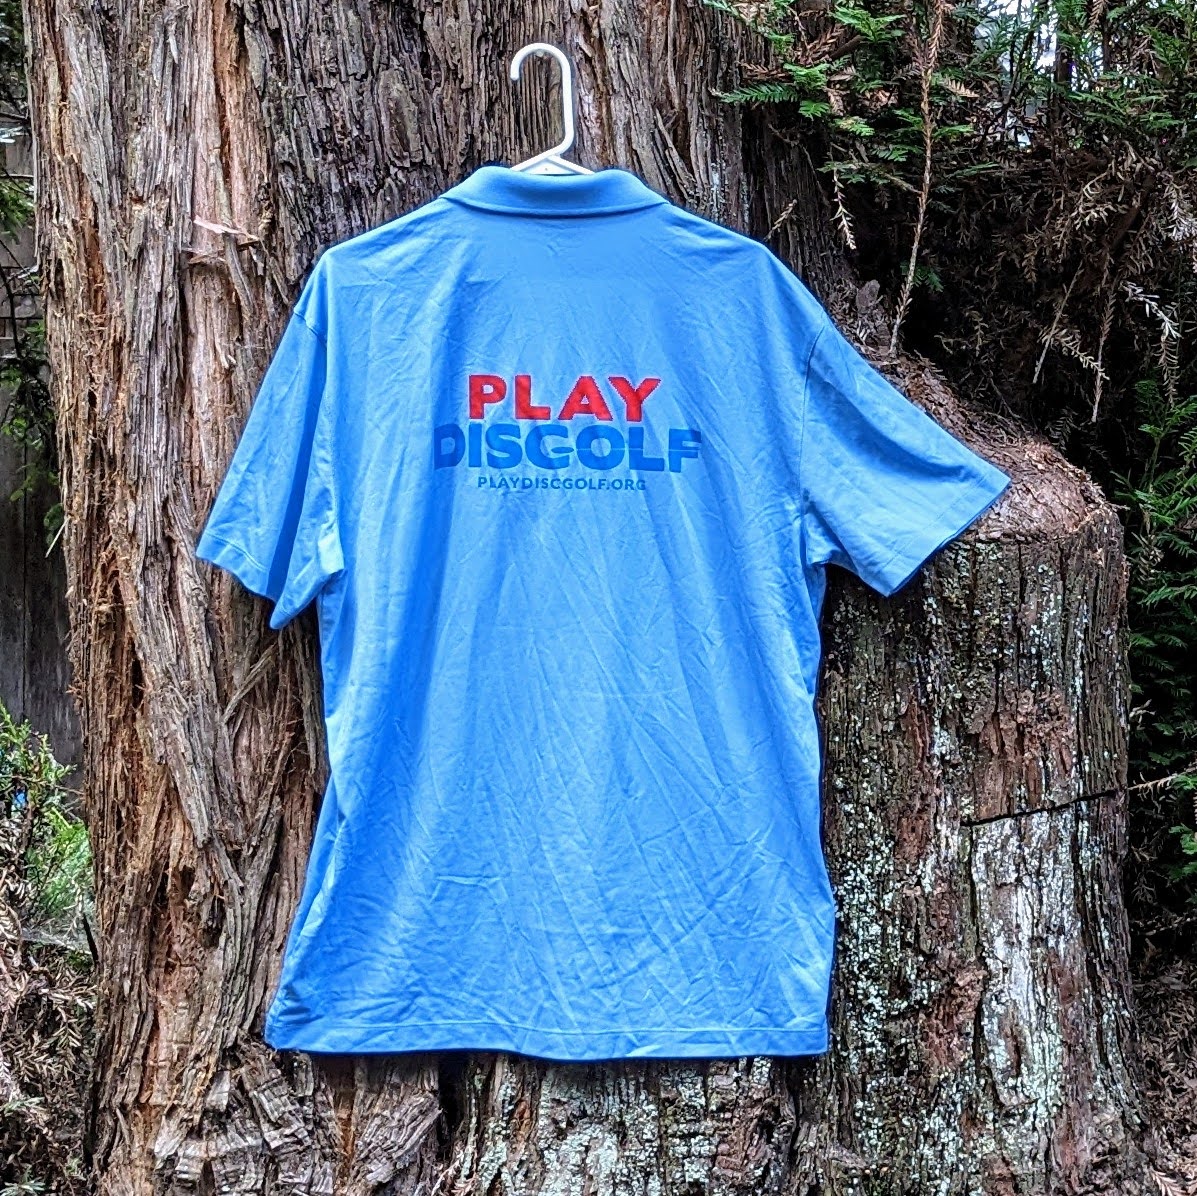 Clearance- Blue Polo with Play Discgolf Logo, Size XL